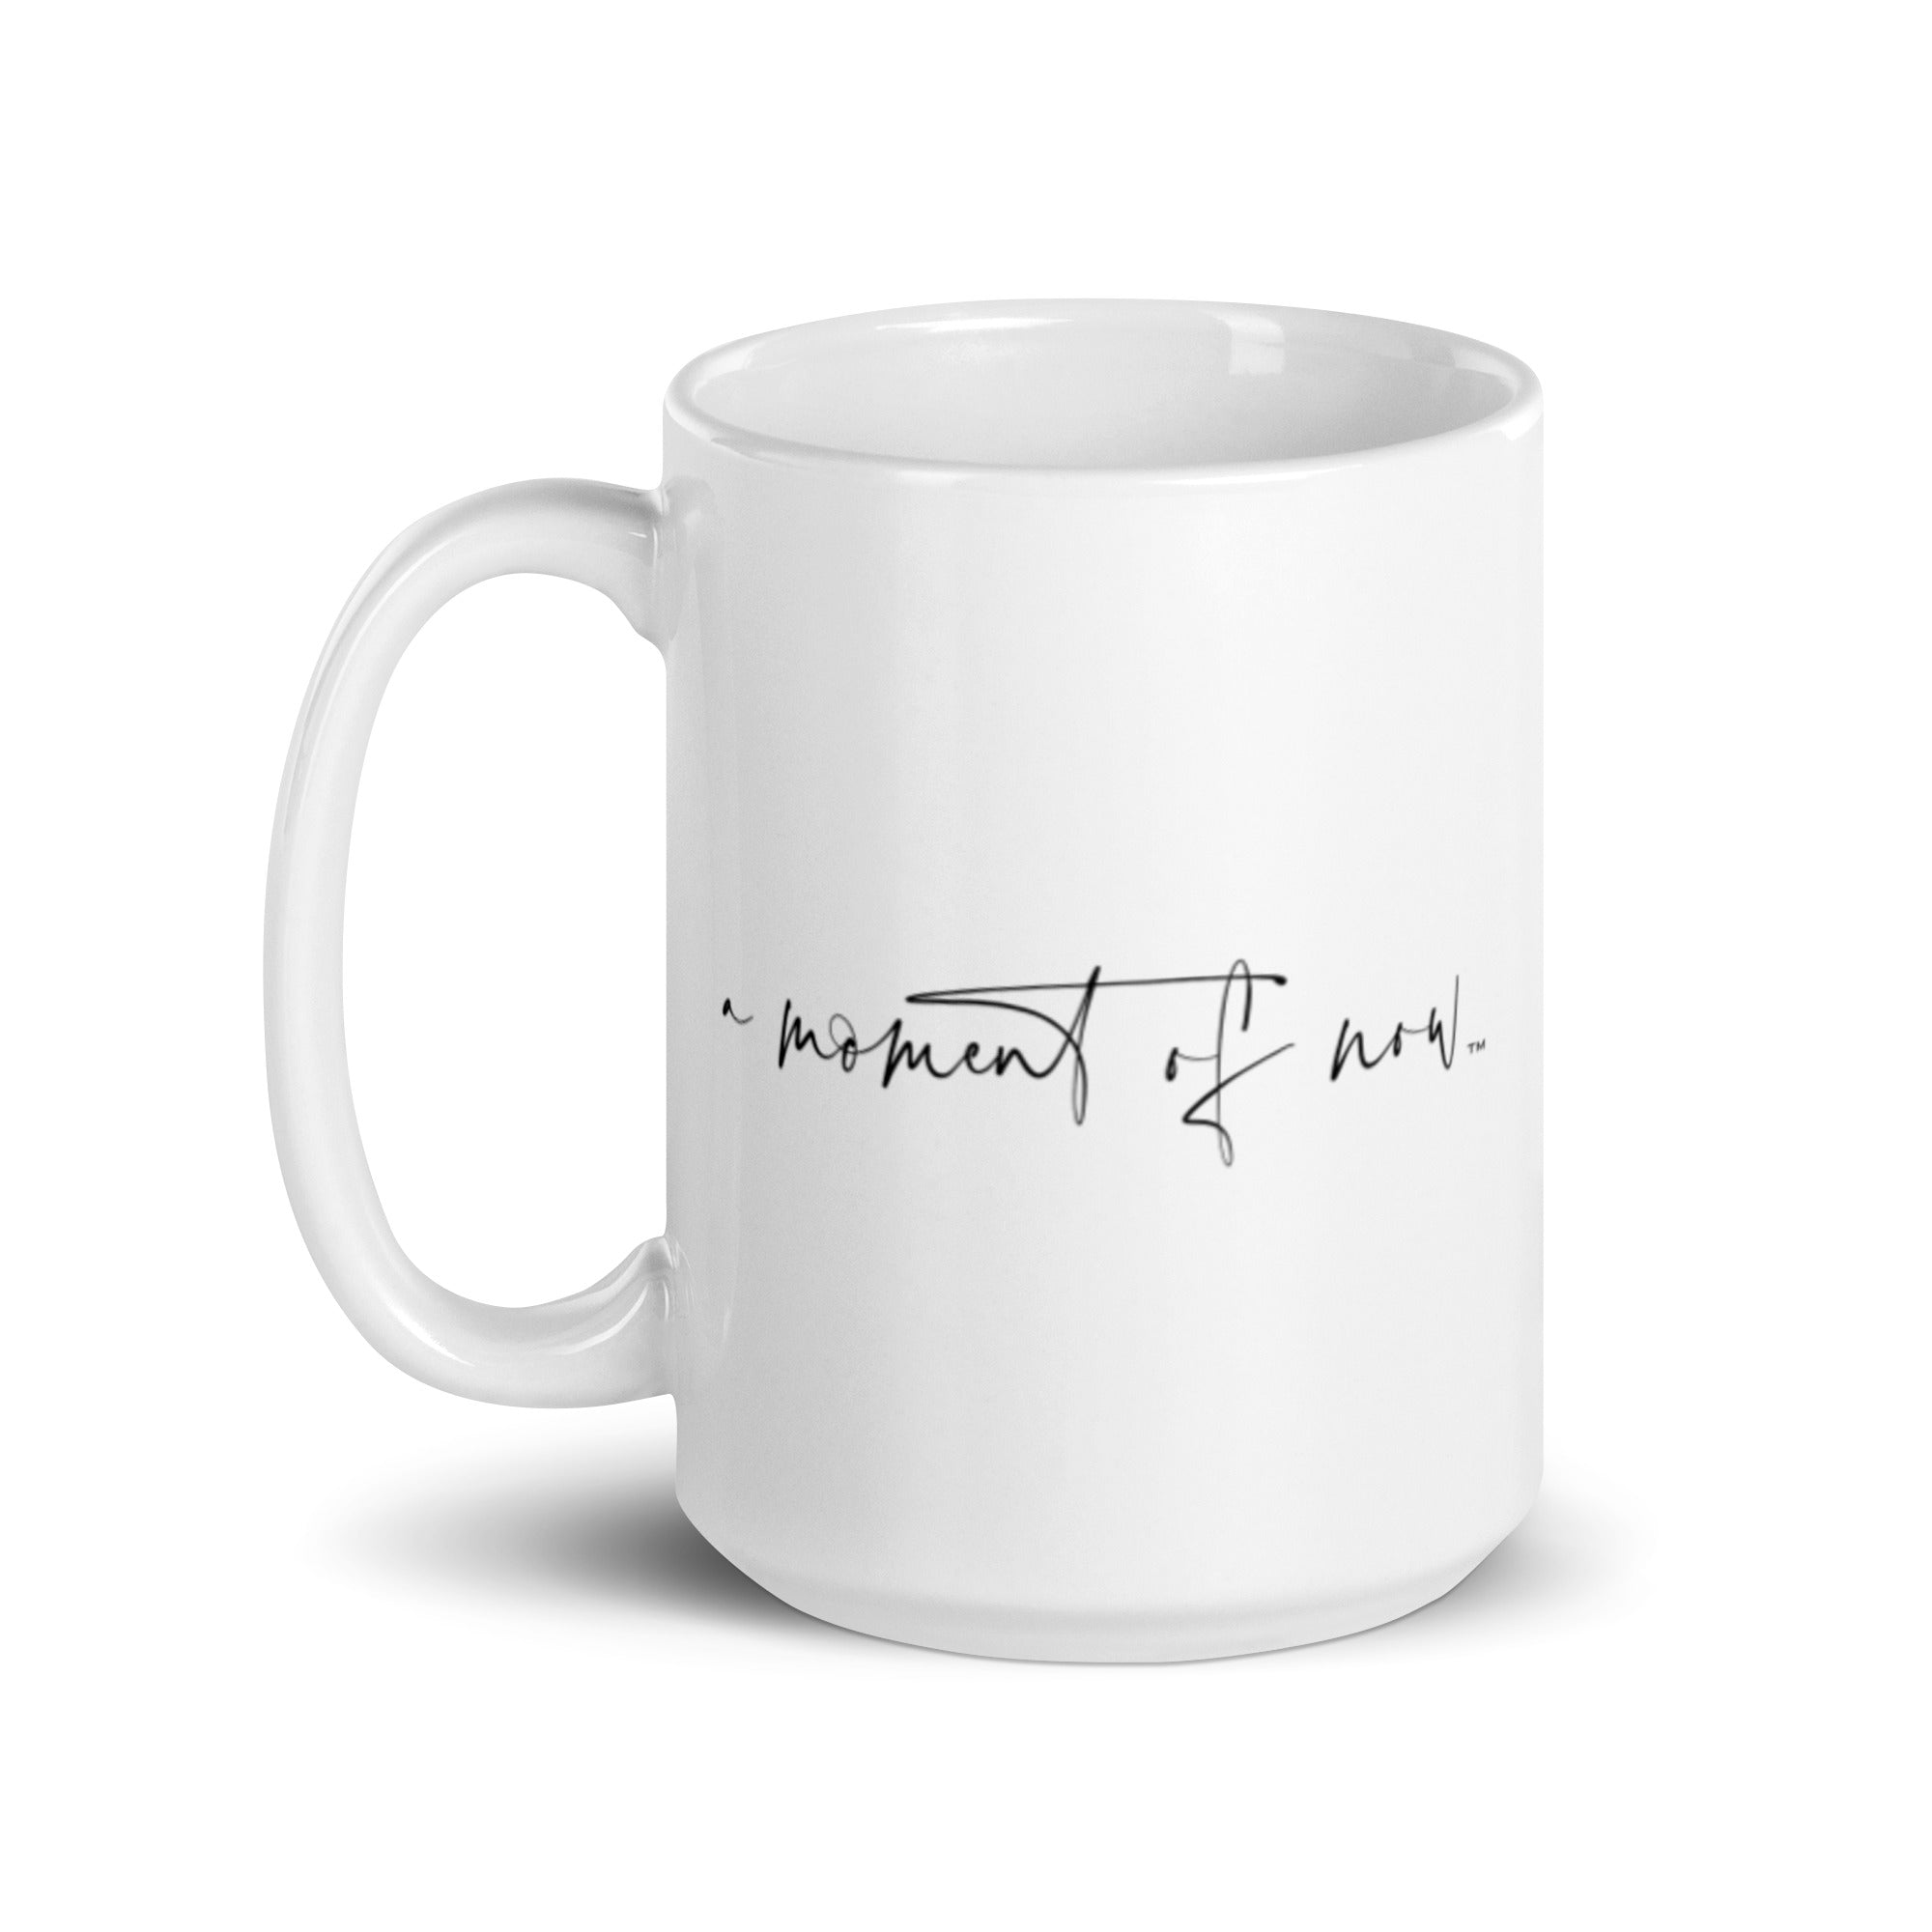 A Moment Of Now™ Mindfulness Coffee Tea Cup Mug Mugs A Moment Of Now Women’s Boutique Clothing Online Lifestyle Store